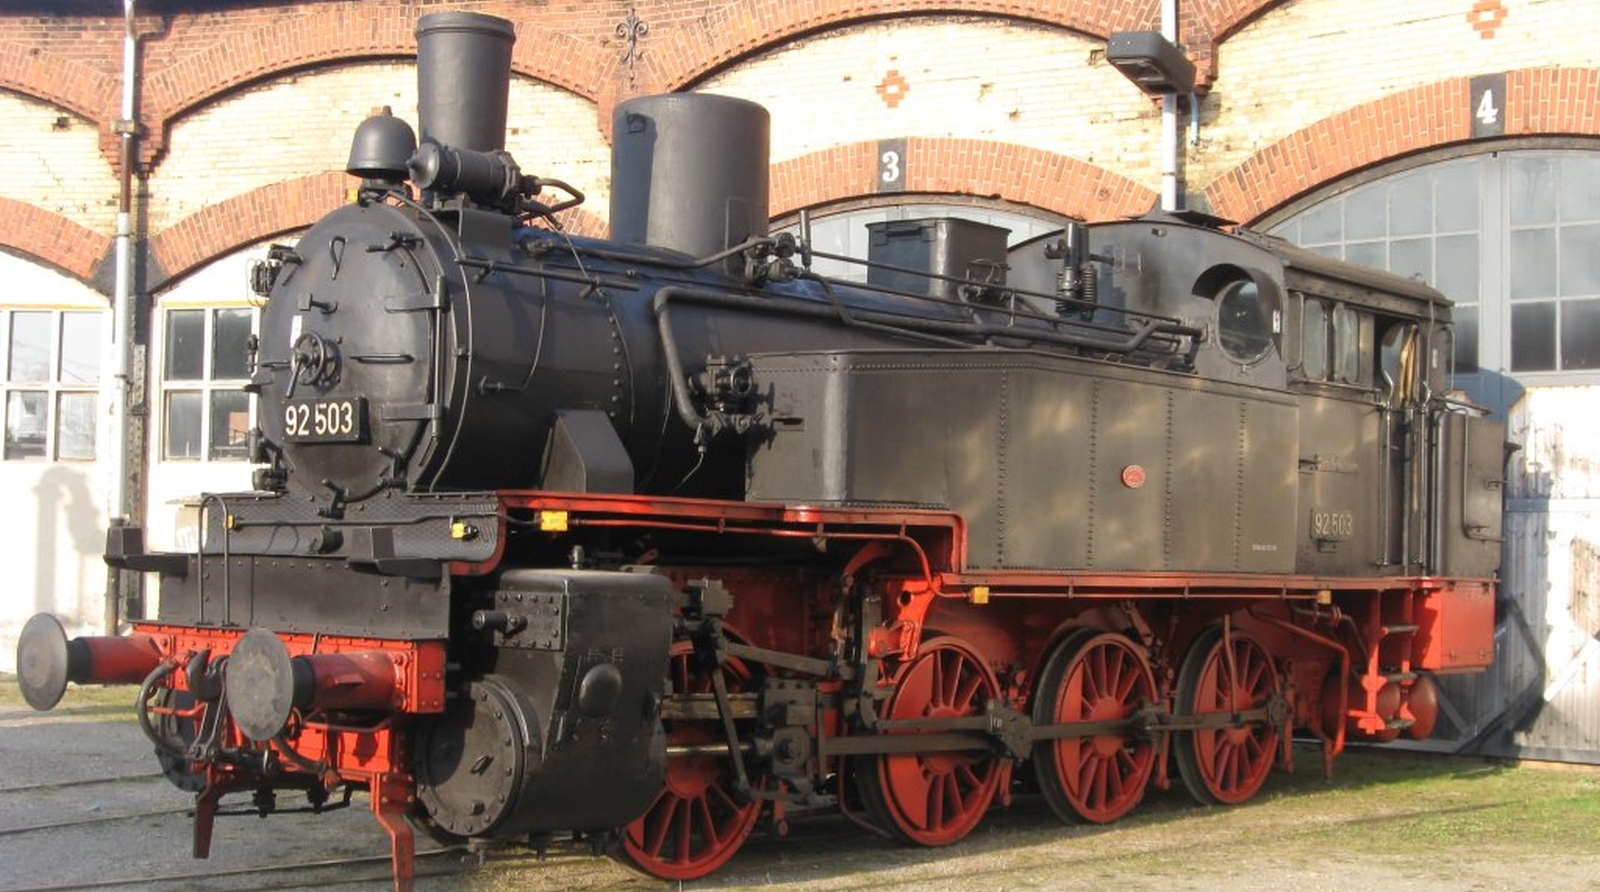 92 503 (Union variant) in Dresden traffic museum, being the third T 13 build